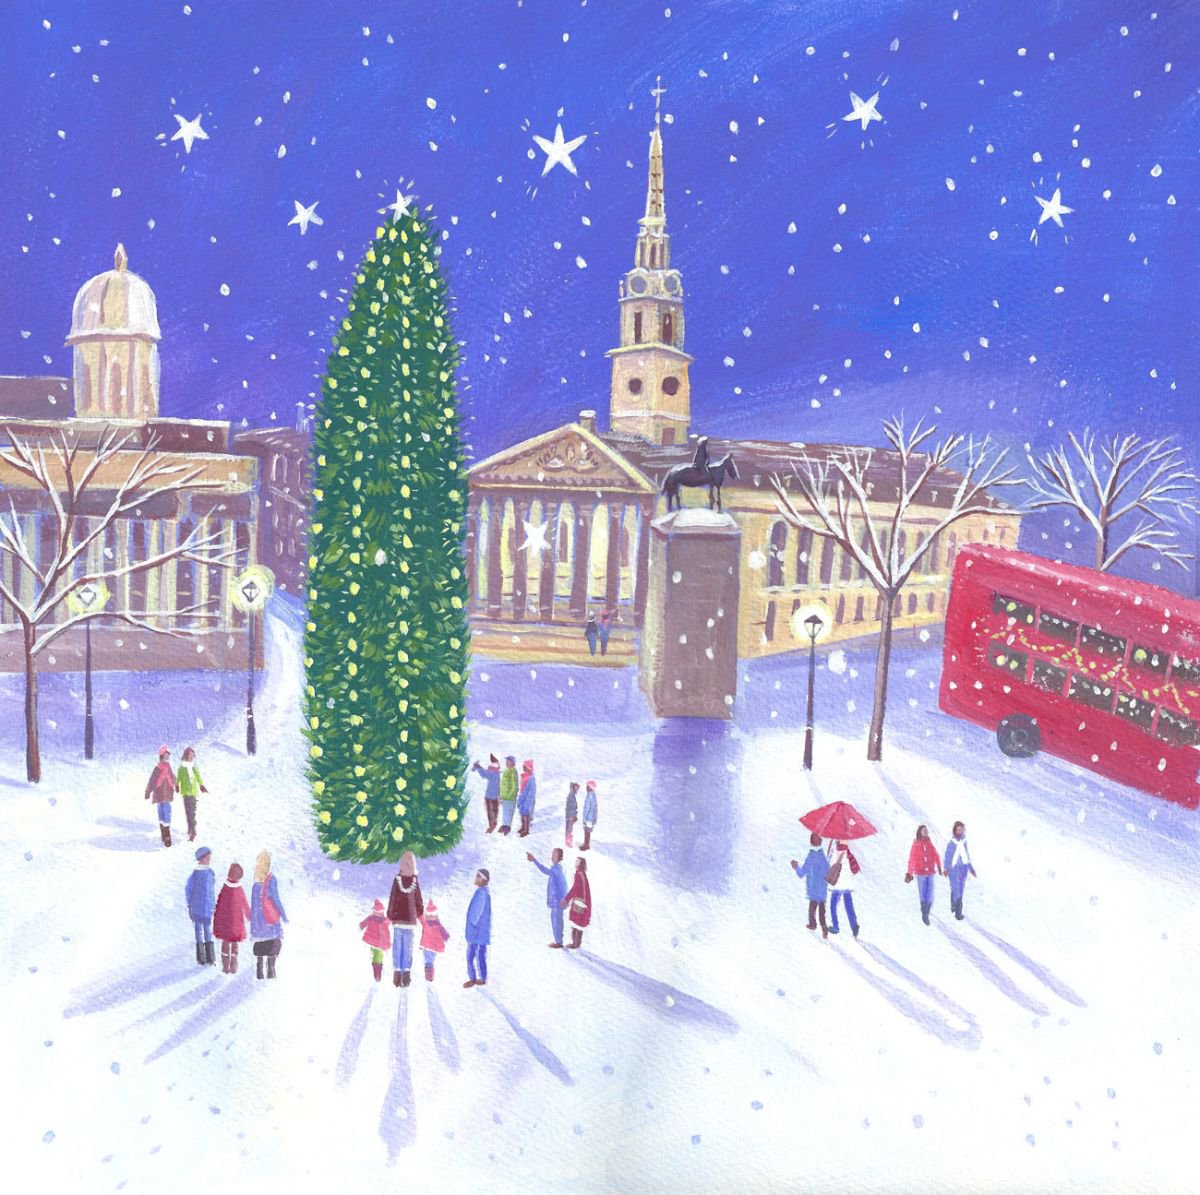 Trafalgar Square at Christmas by Mary Stubberfield